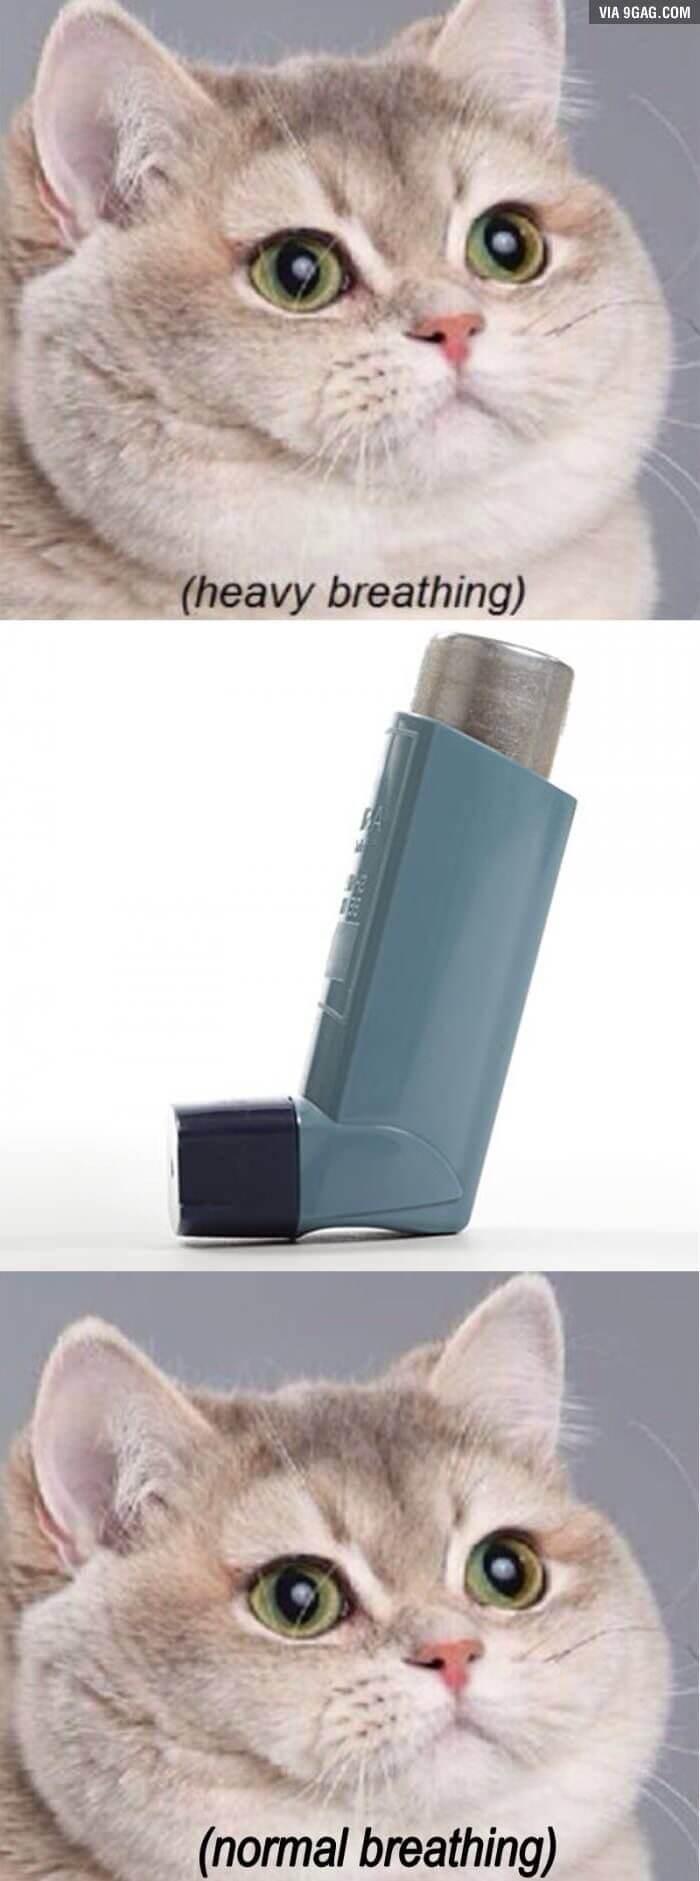 14 Asthma Memes That Will Leave You Breathless